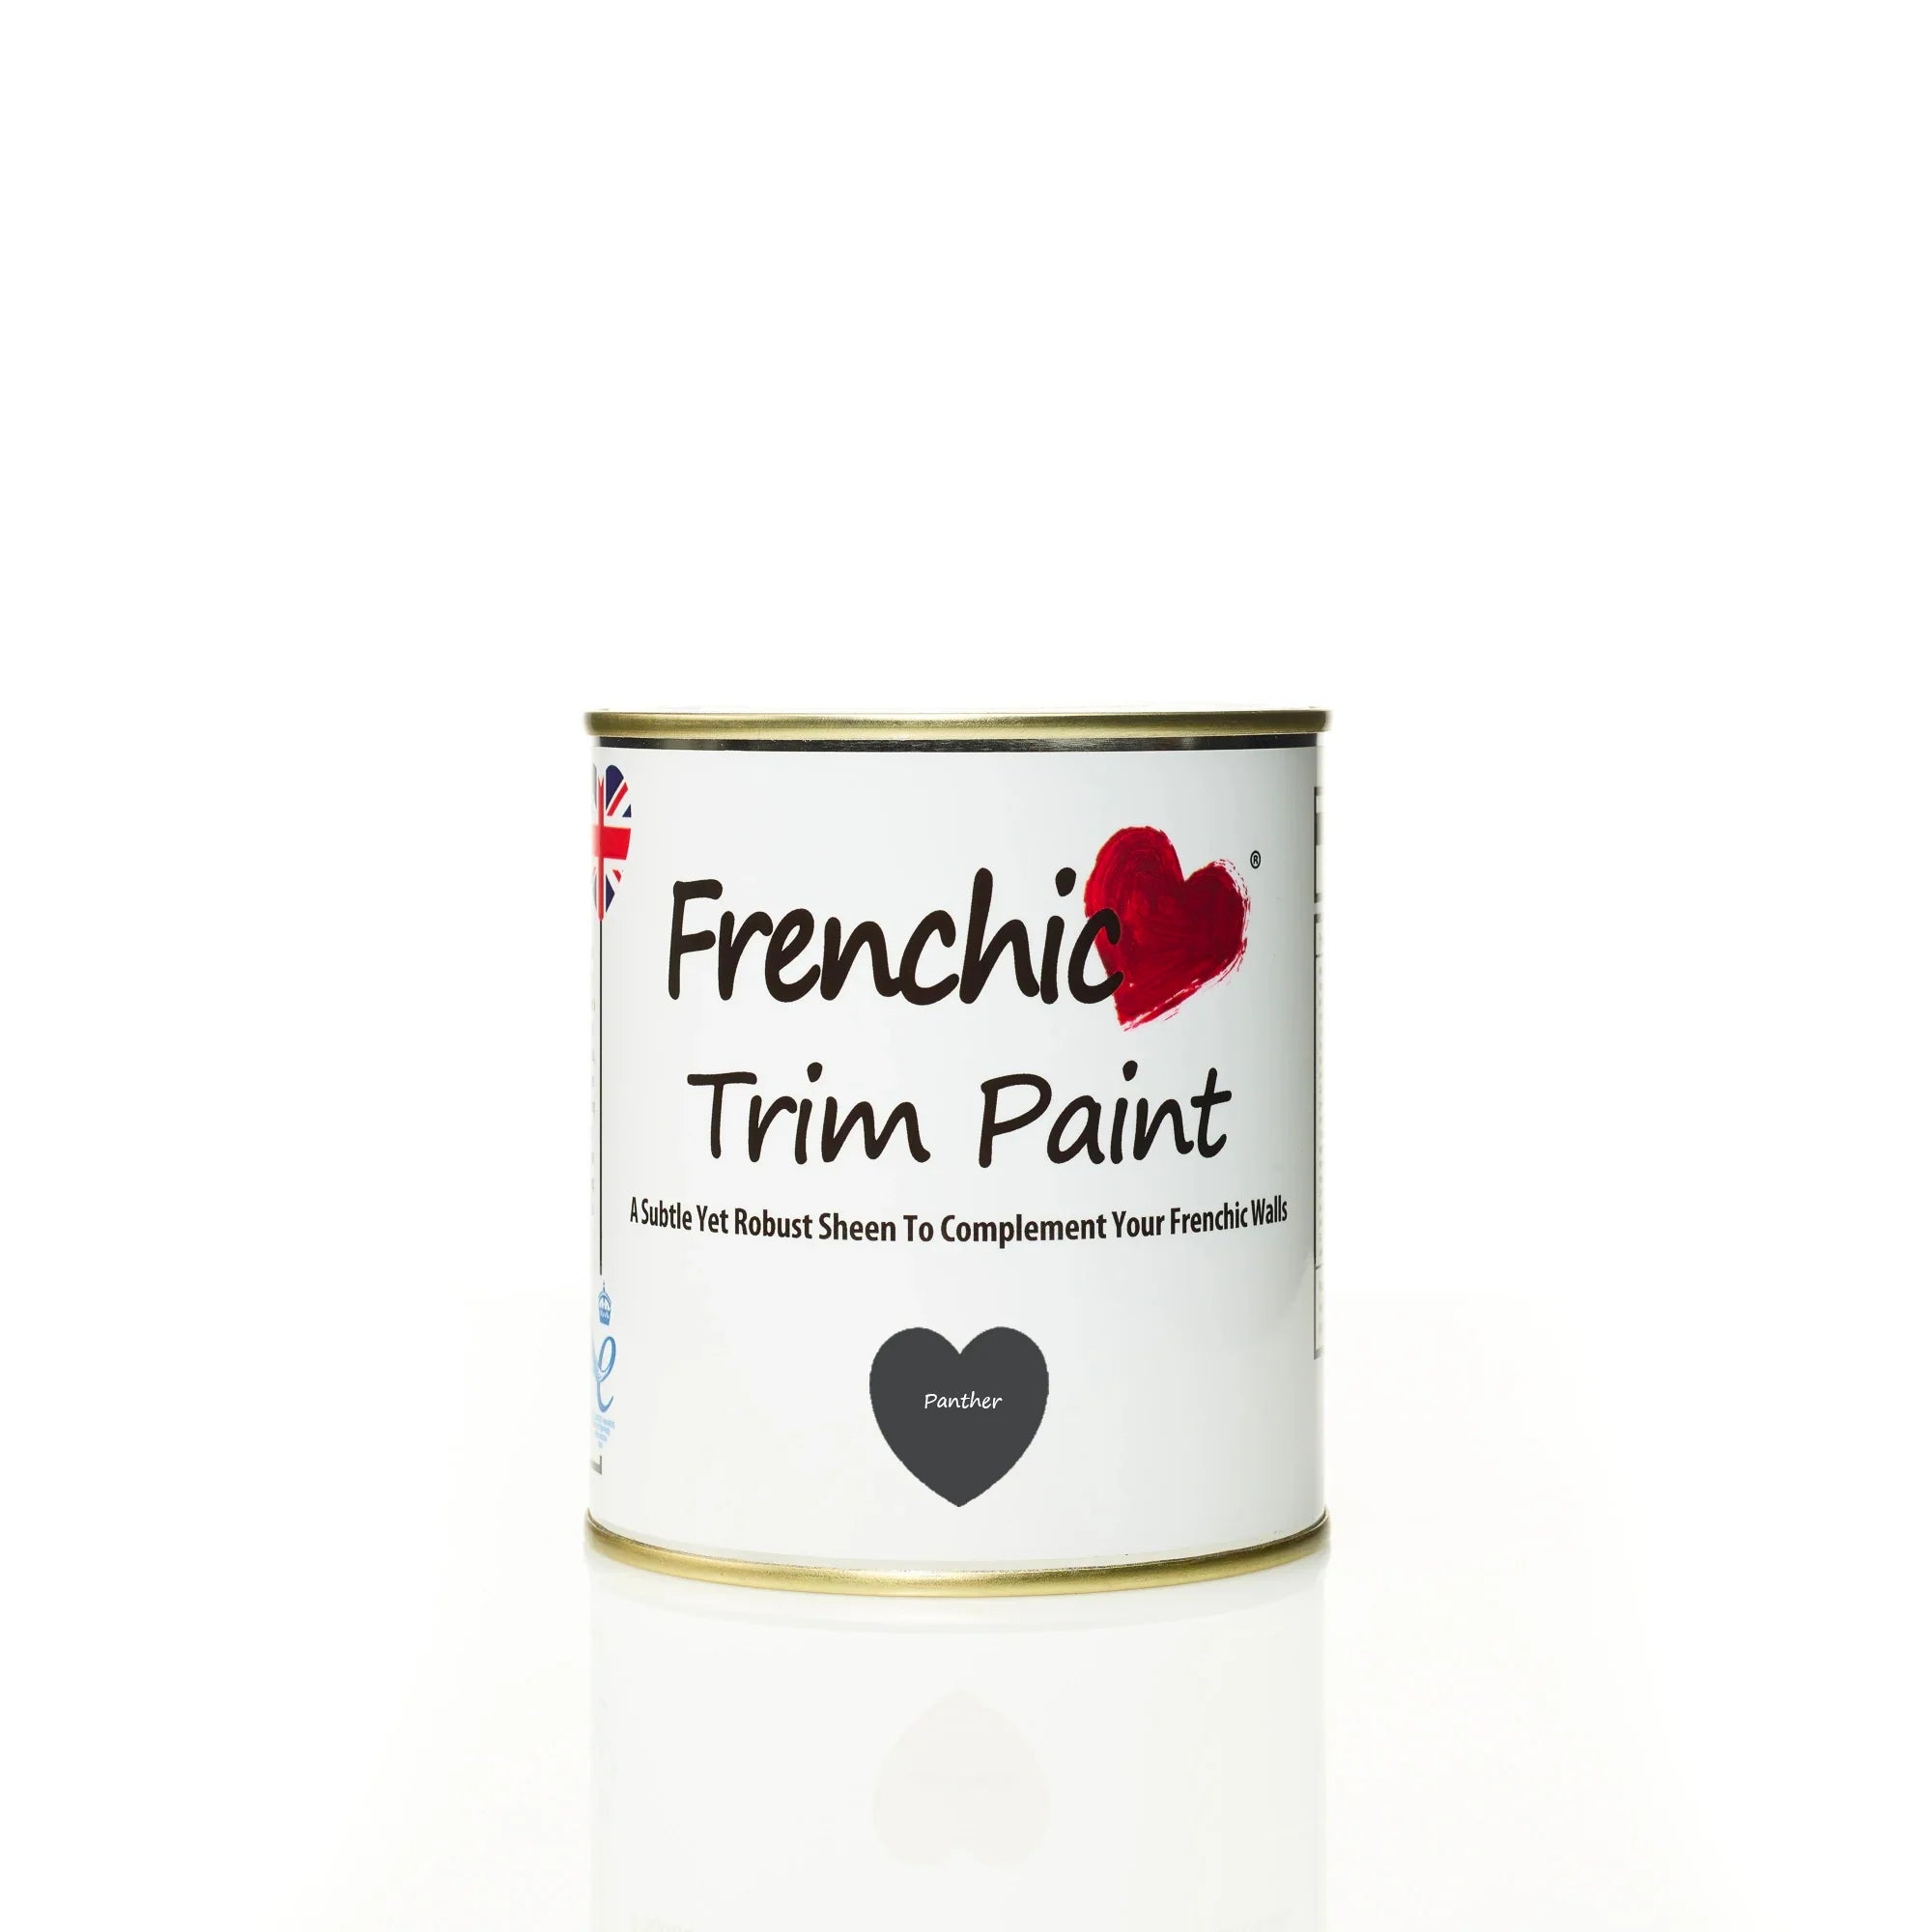 Frenchic Paint Panther Trim Paint Frenchic Paint Trim Paint Range by Weirs of Baggot Street Irelands Largest and most Trusted Stockist of Frenchic Paint. Shop online for Nationwide and Same Day Dublin Delivery